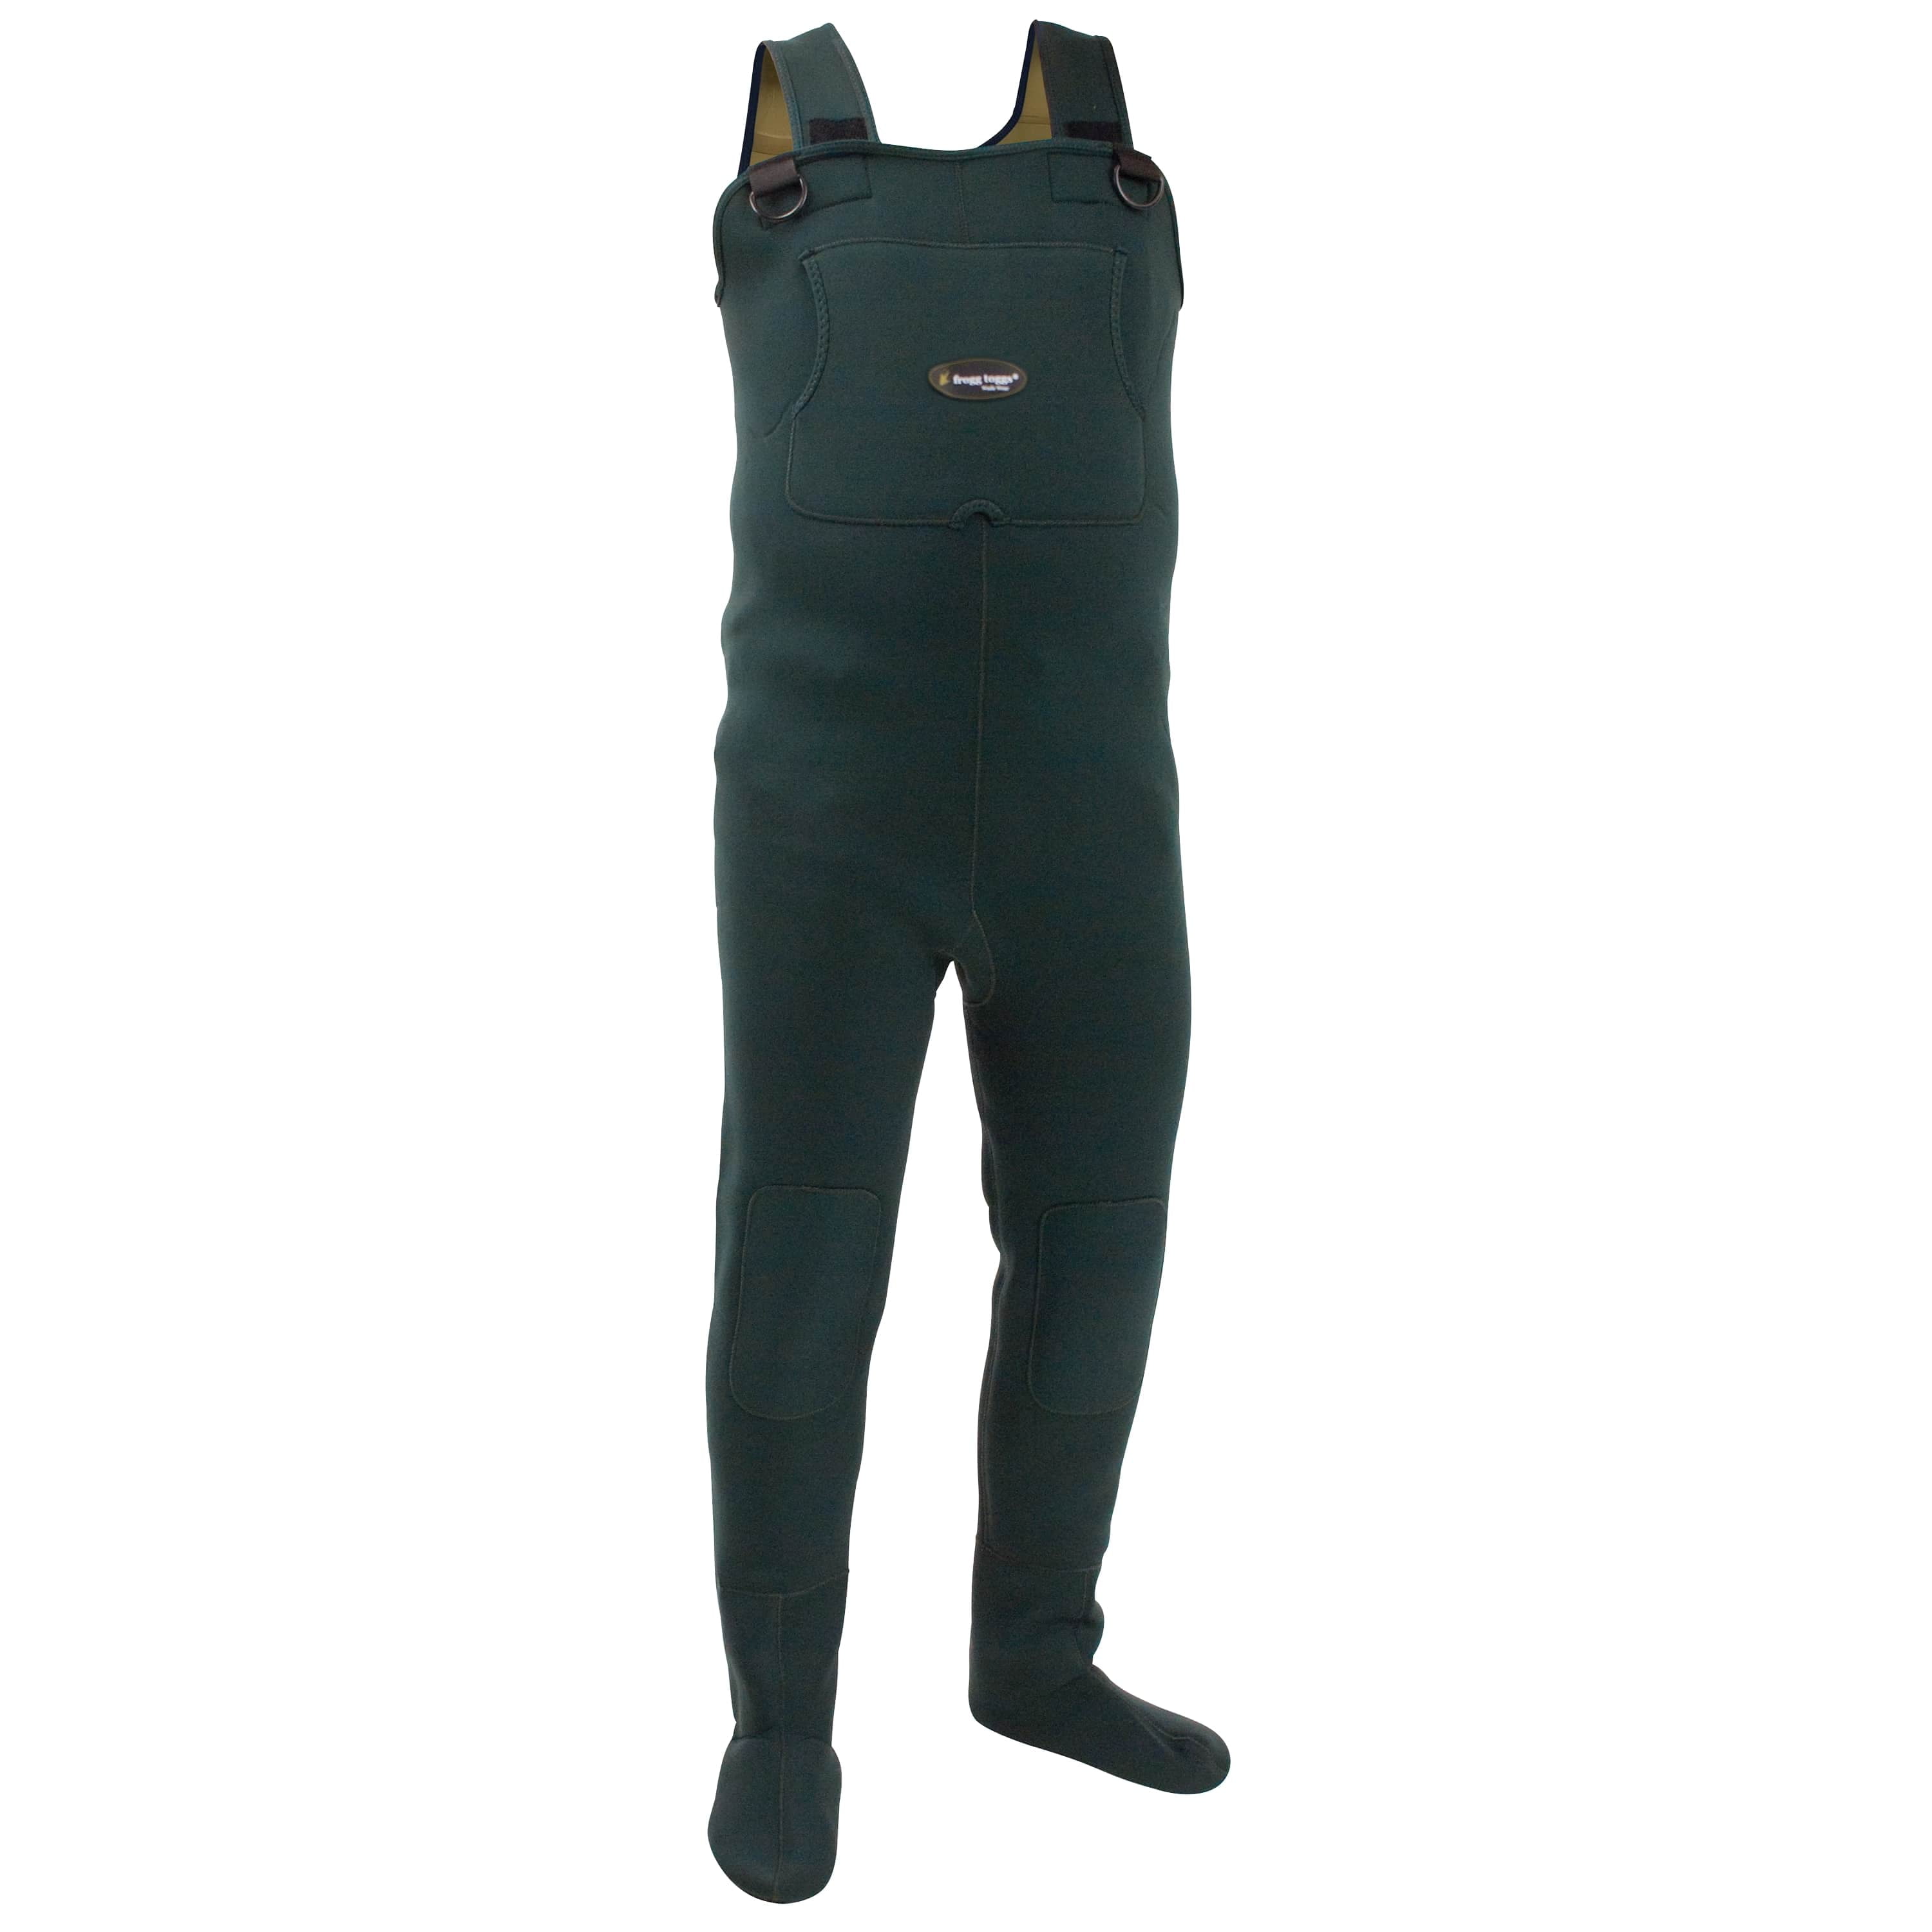 Caddis Men's Deluxe Breathable Stockingfoot Waders - L Stout 